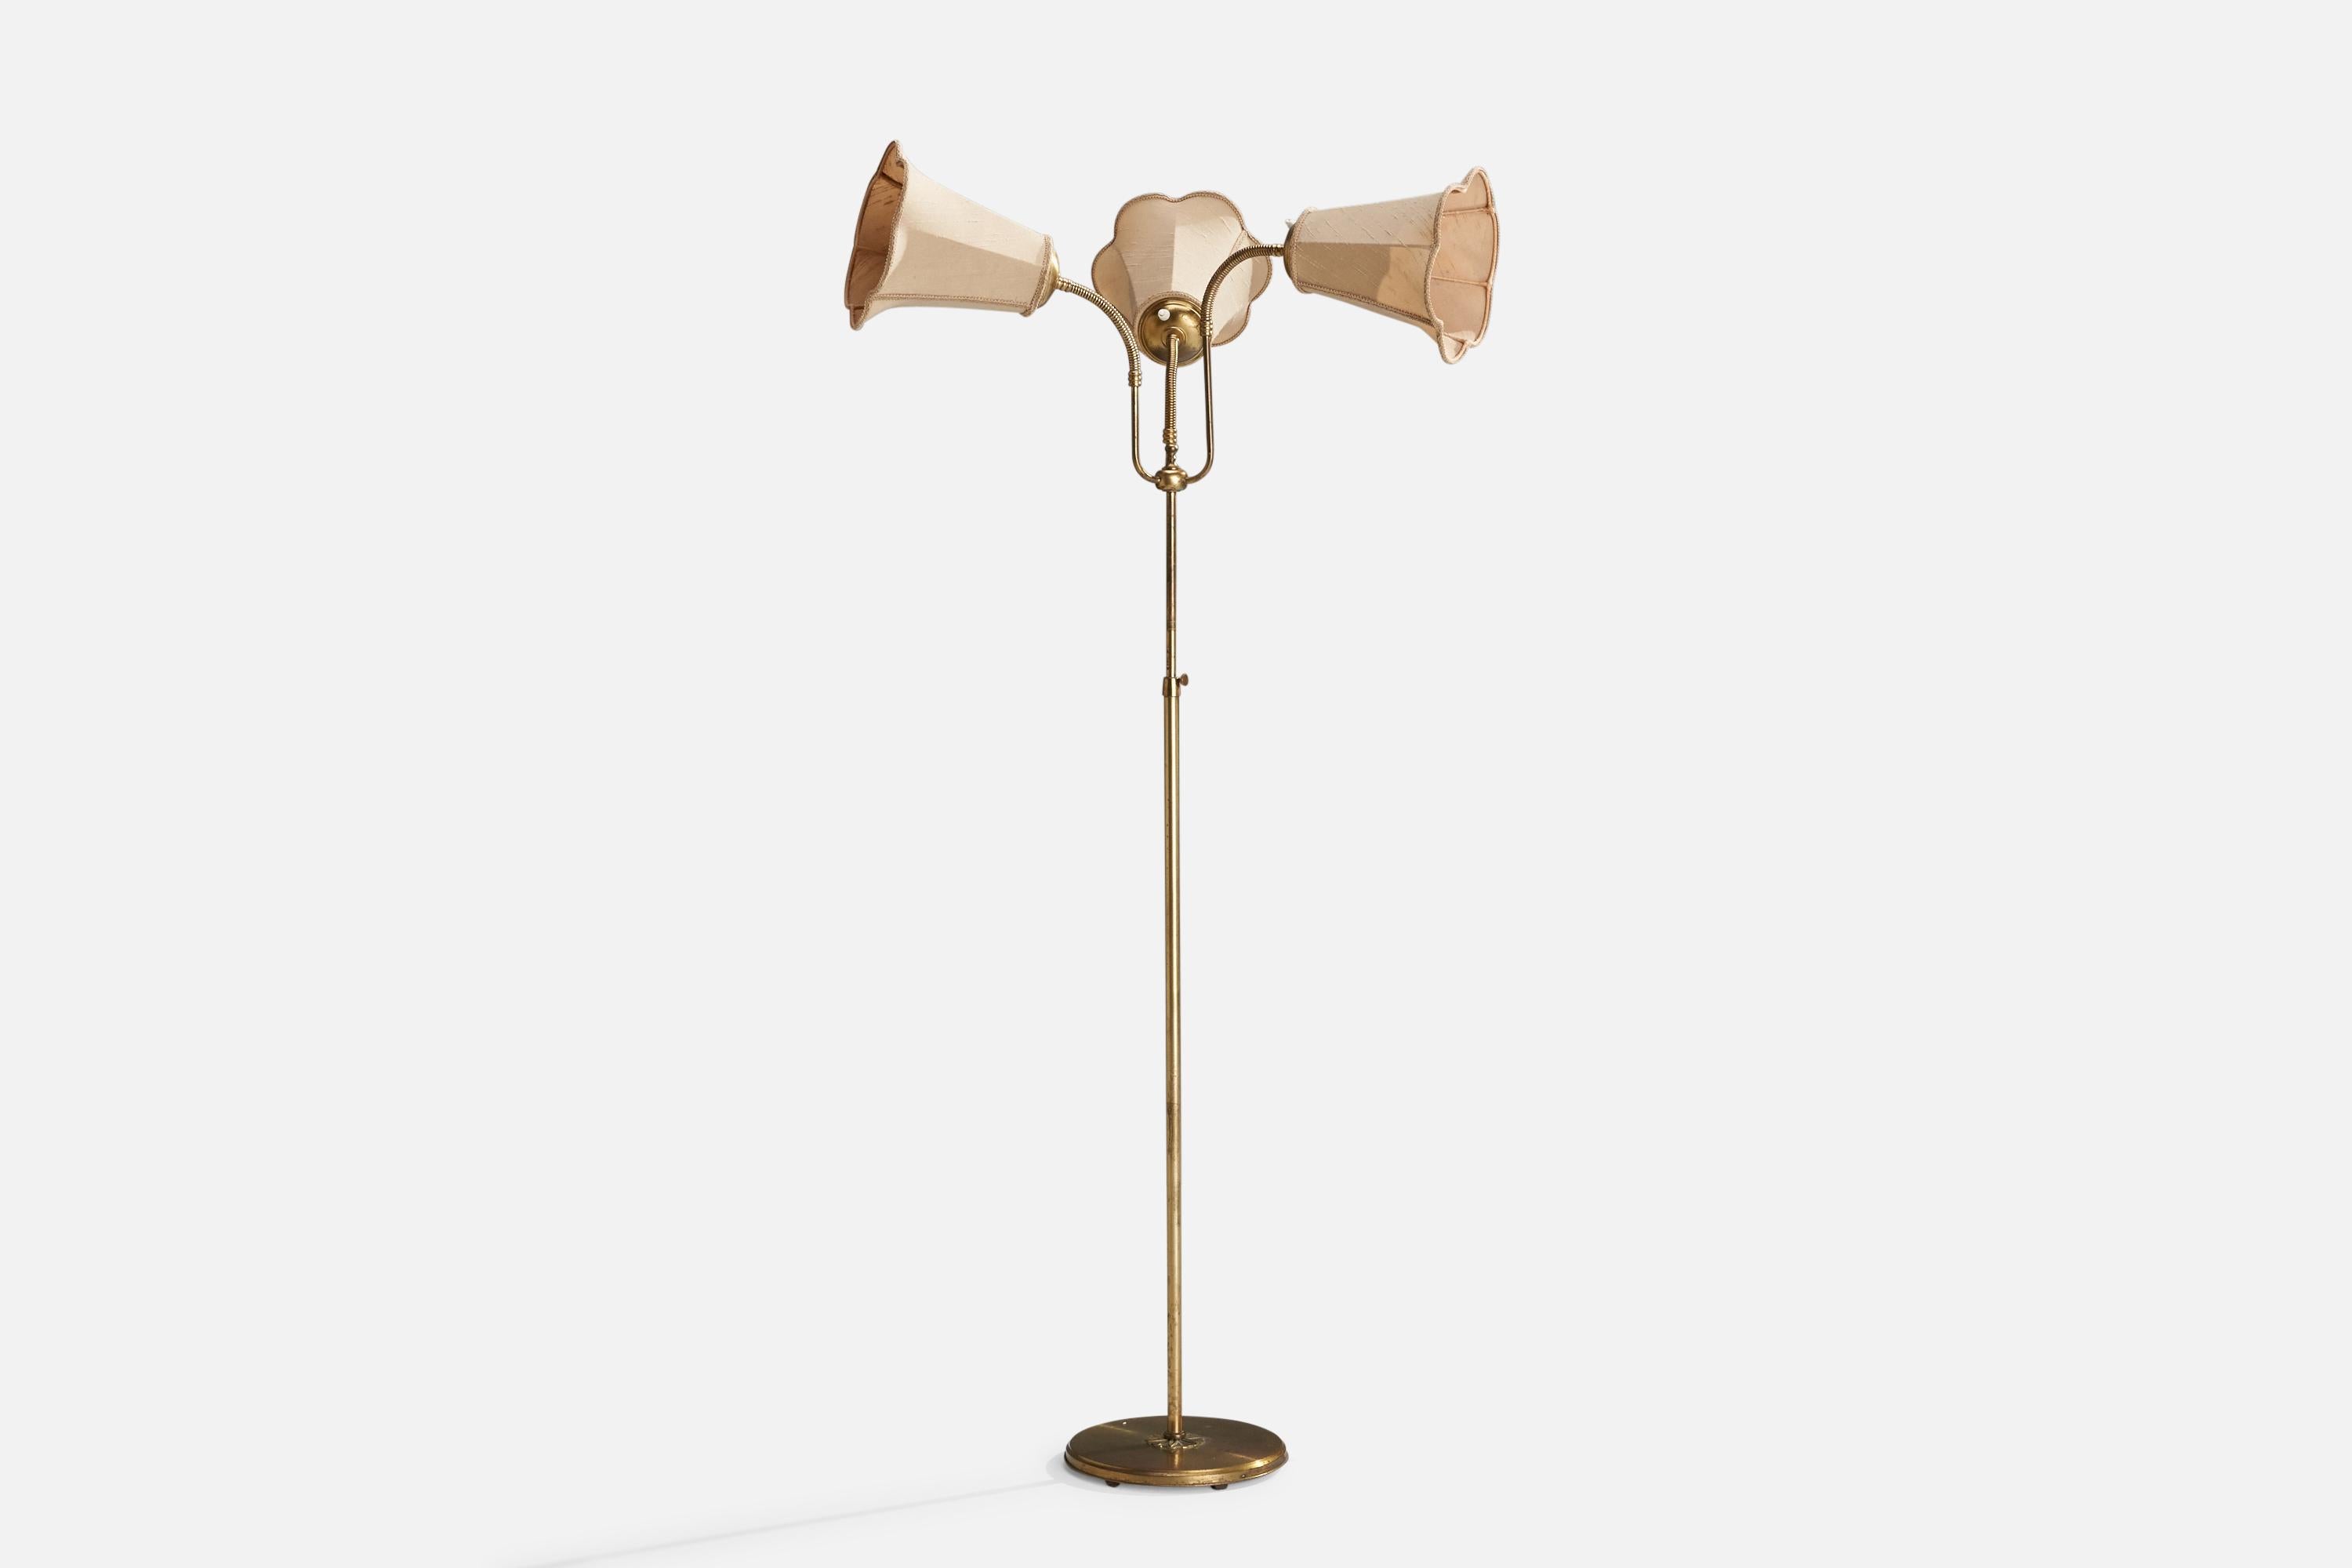 An adjustable brass and light pink fabric floor lamp designed and produced in Sweden, c. 1940s.

Dimensions variable 
Overall Dimensions (inches):59.75” H x 32.25” W x 23.5” D
Stated dimensions include shade.
Bulb Specifications: E-26 Bulb
Number of